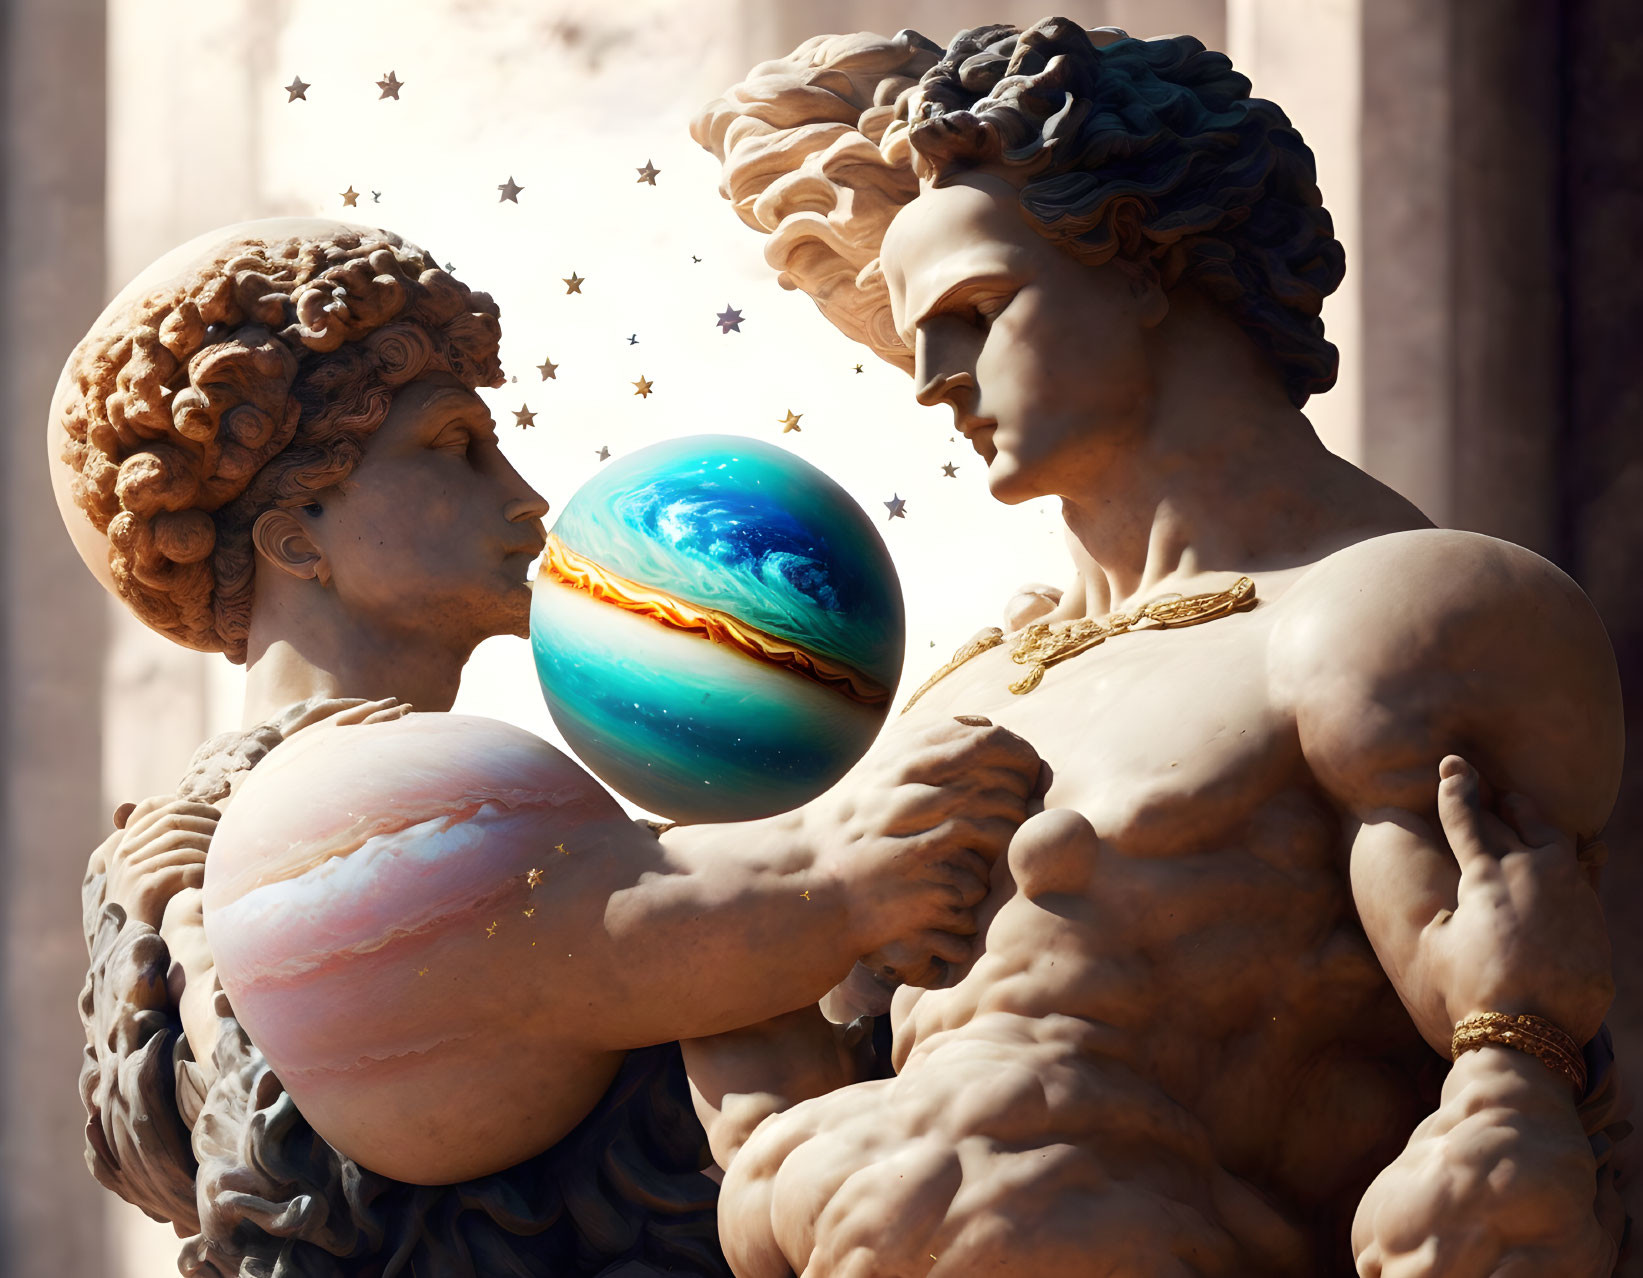 Classical sculptures with stylized planet and stars against architectural backdrop